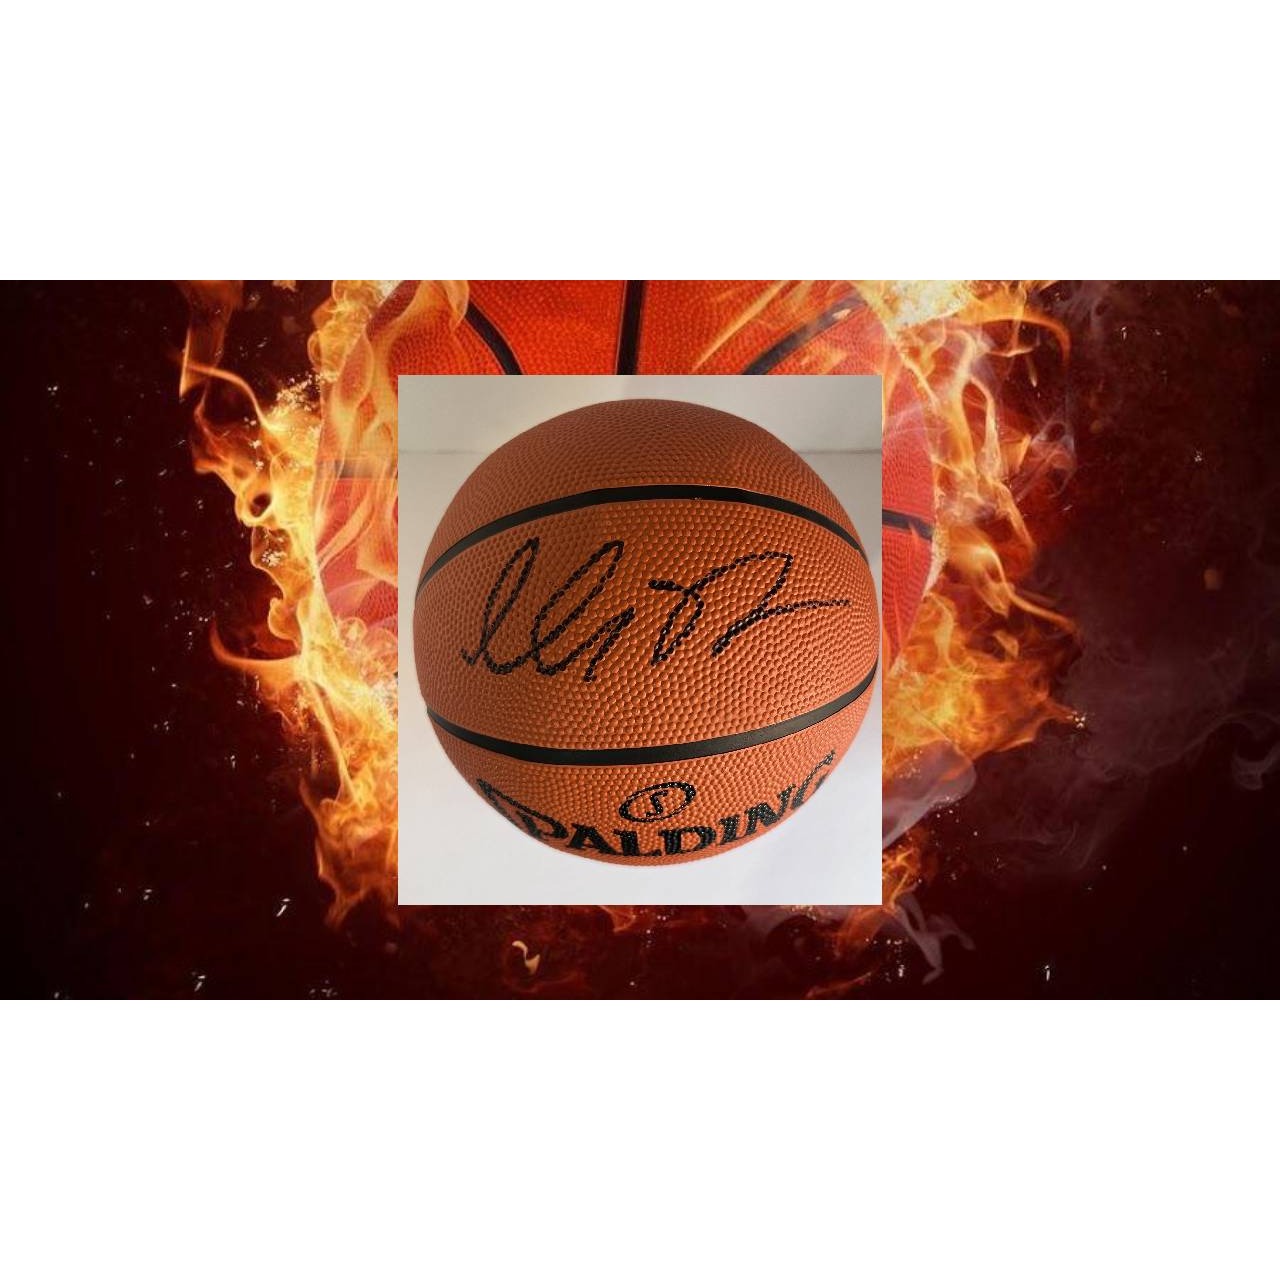 Luca Doncic Dallas Mavericks Spalding NBA full size basketball signed with proof